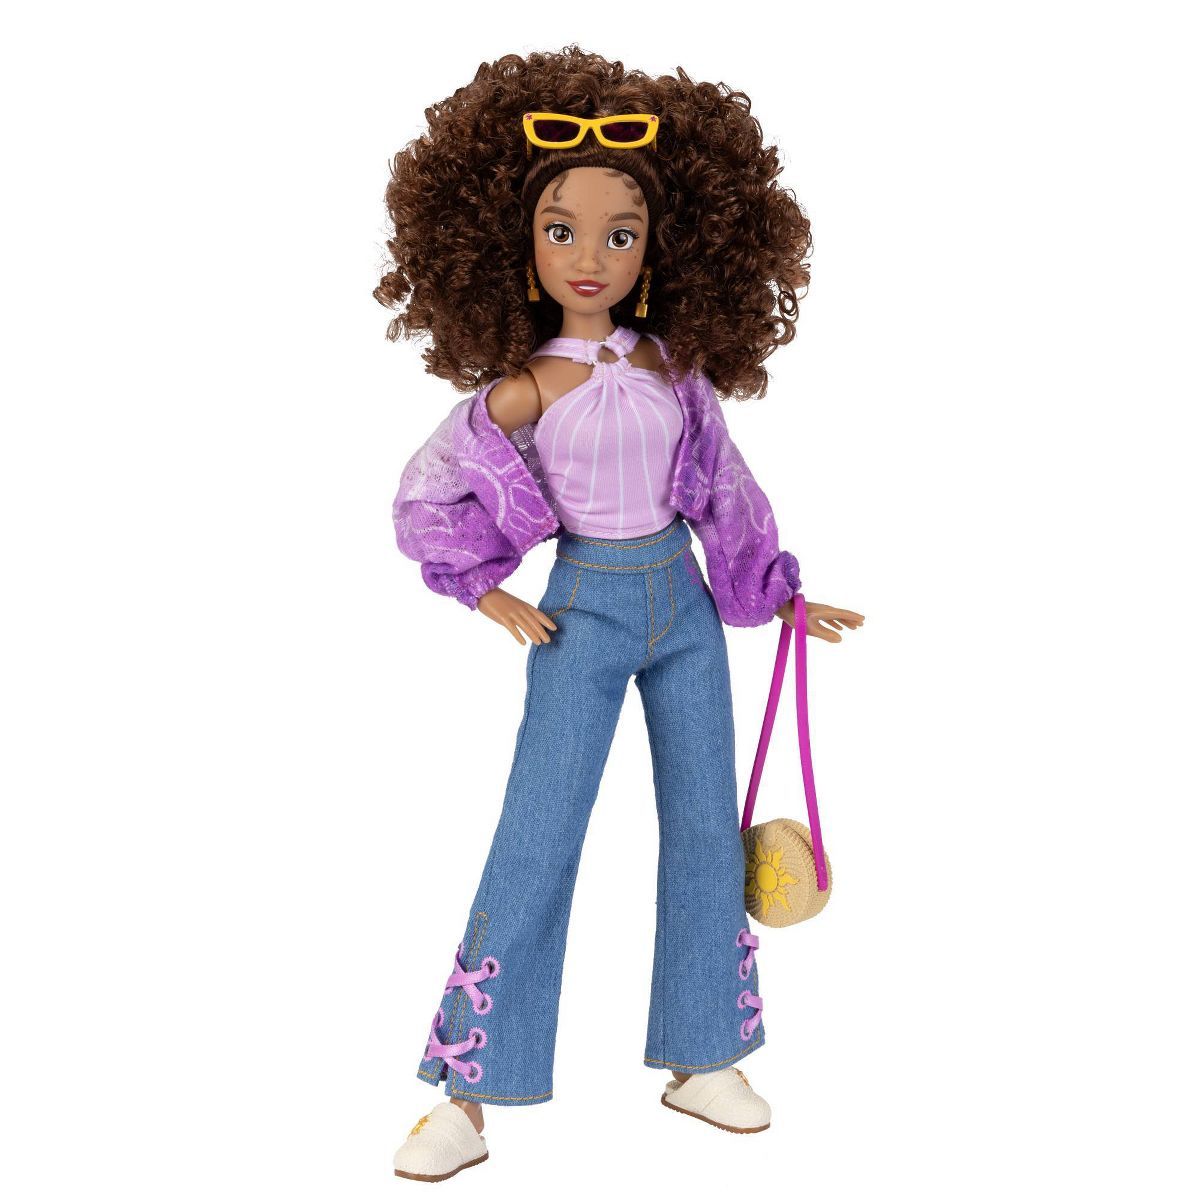 Disney ily 4EVER Inspired by Rapunzel Fashion Doll | Target